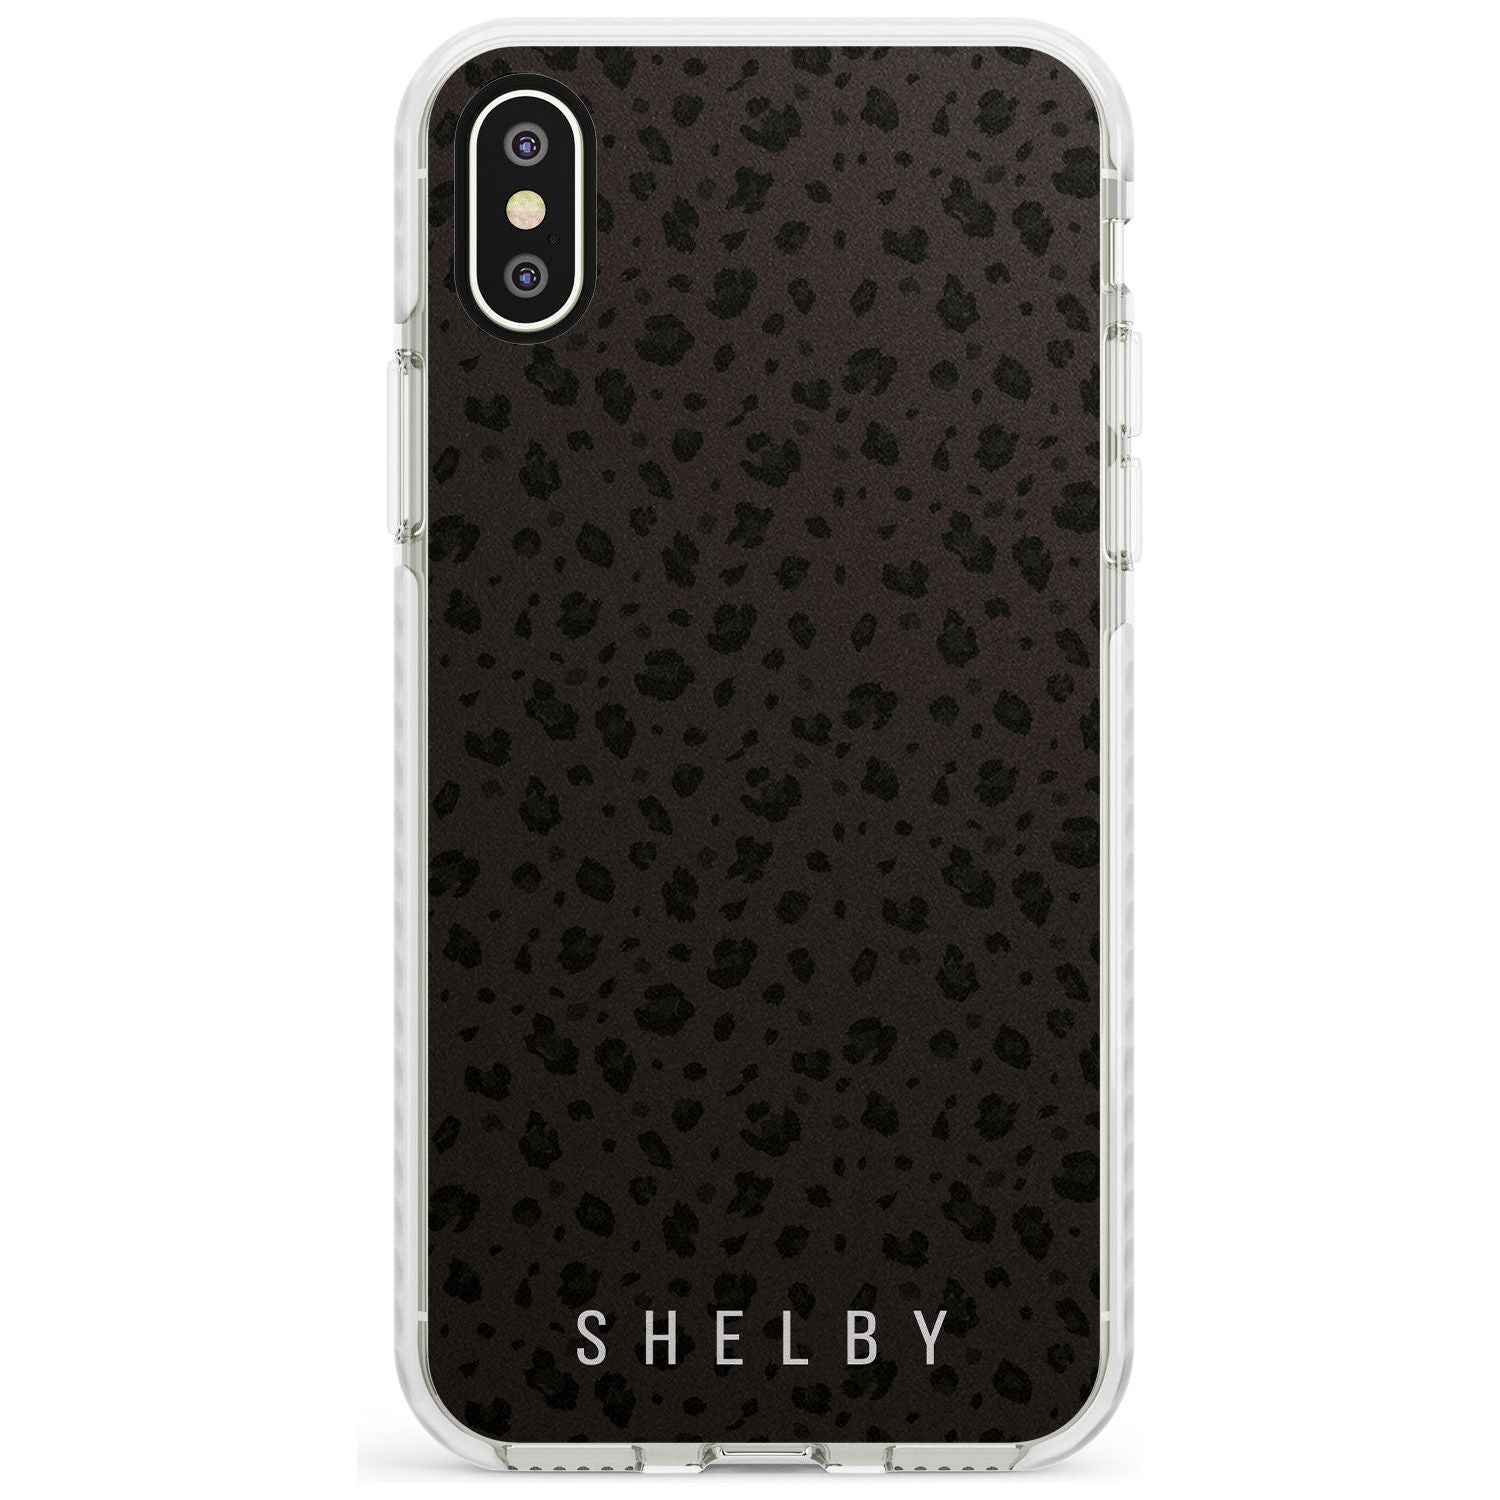 Minimal Lettering Dark Leopard Impact Phone Case for iPhone X XS Max XR